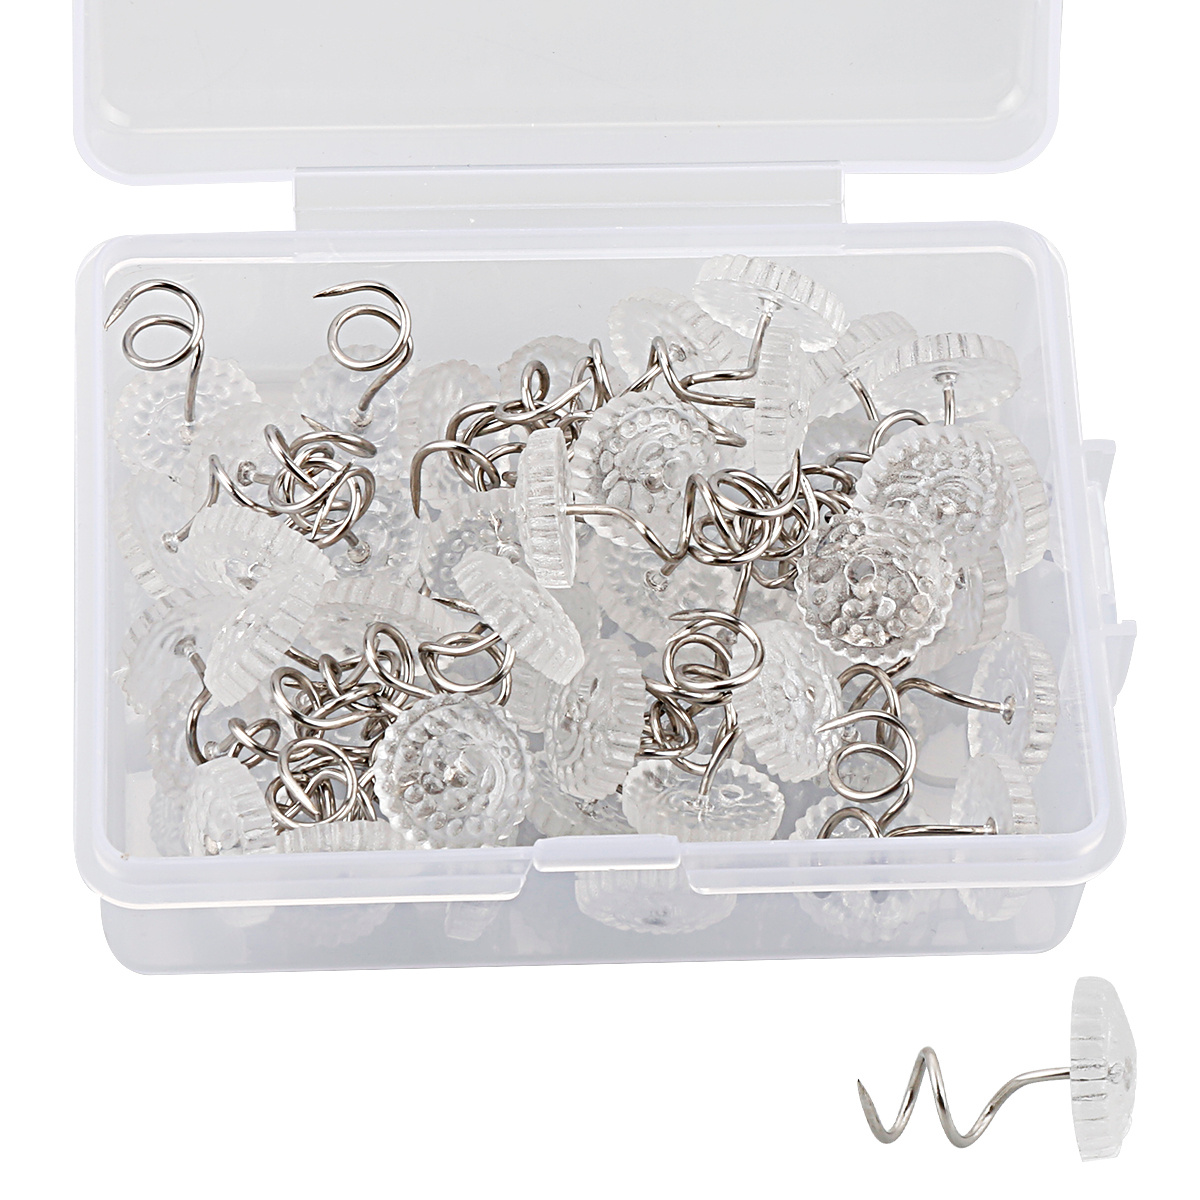 50 Pcs Clear Heads Twist Pins for Upholstery, Holds Slipcovers